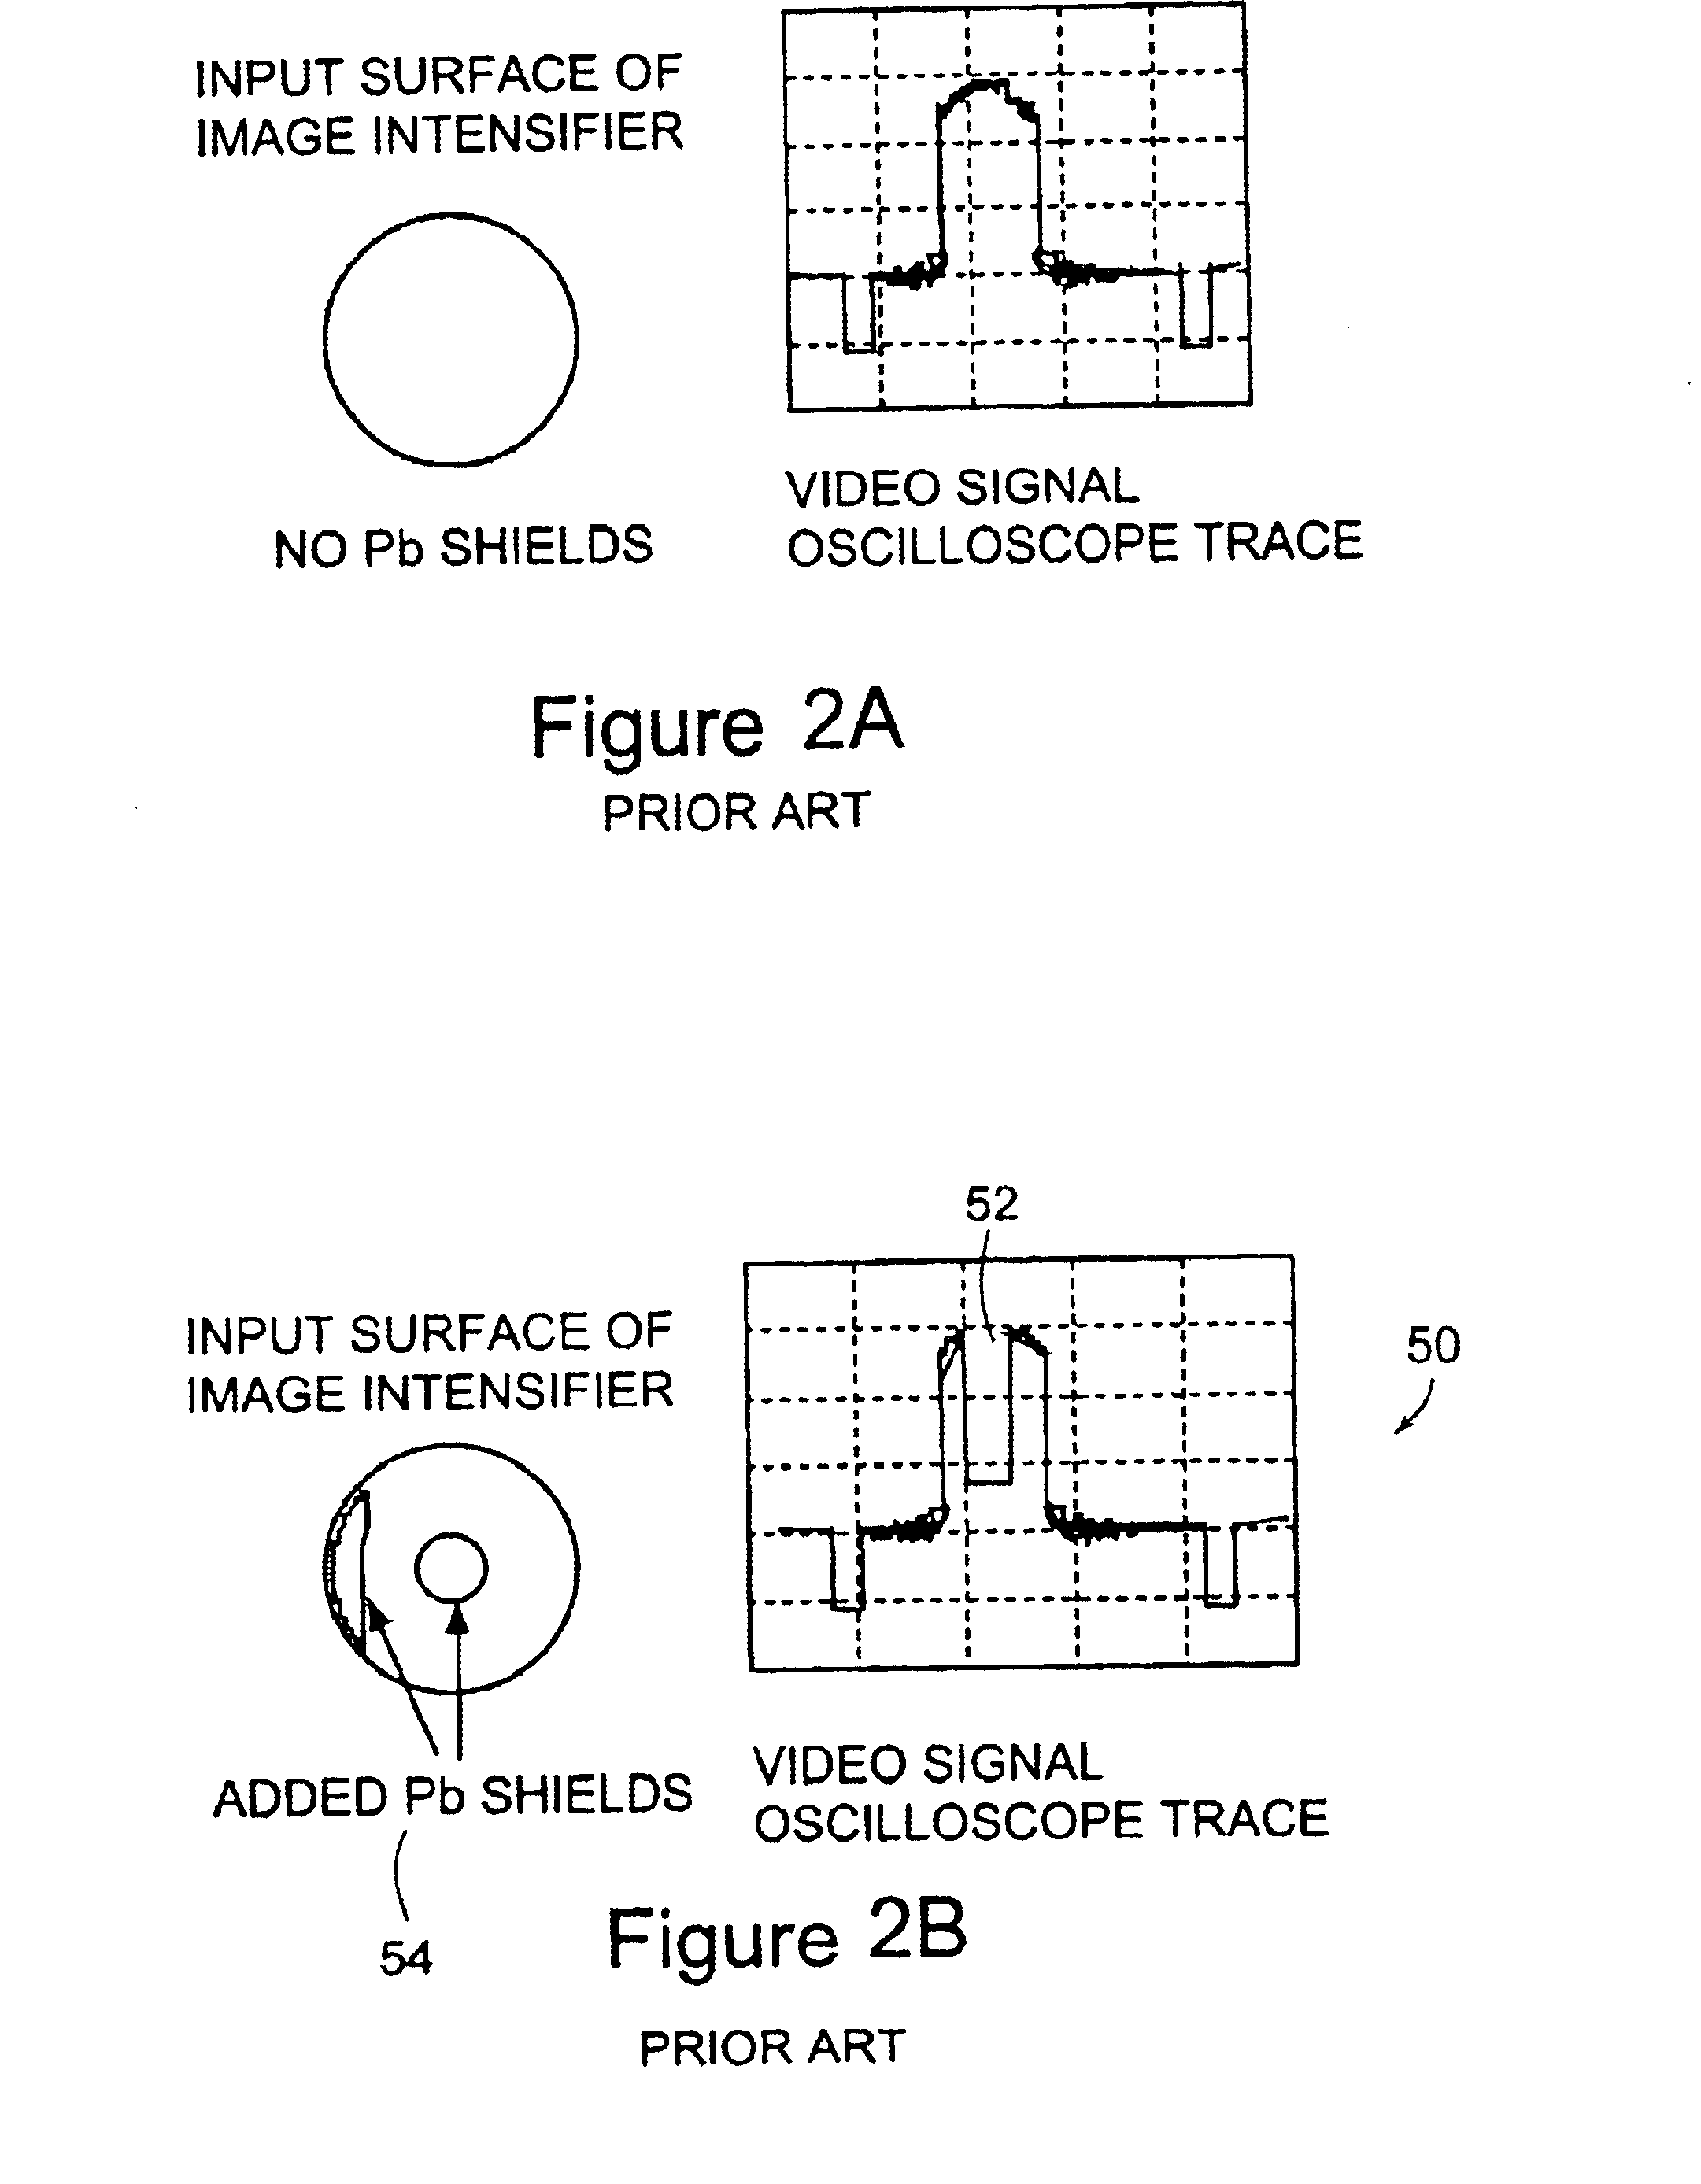 System and method for x-ray fluoroscopic imaging